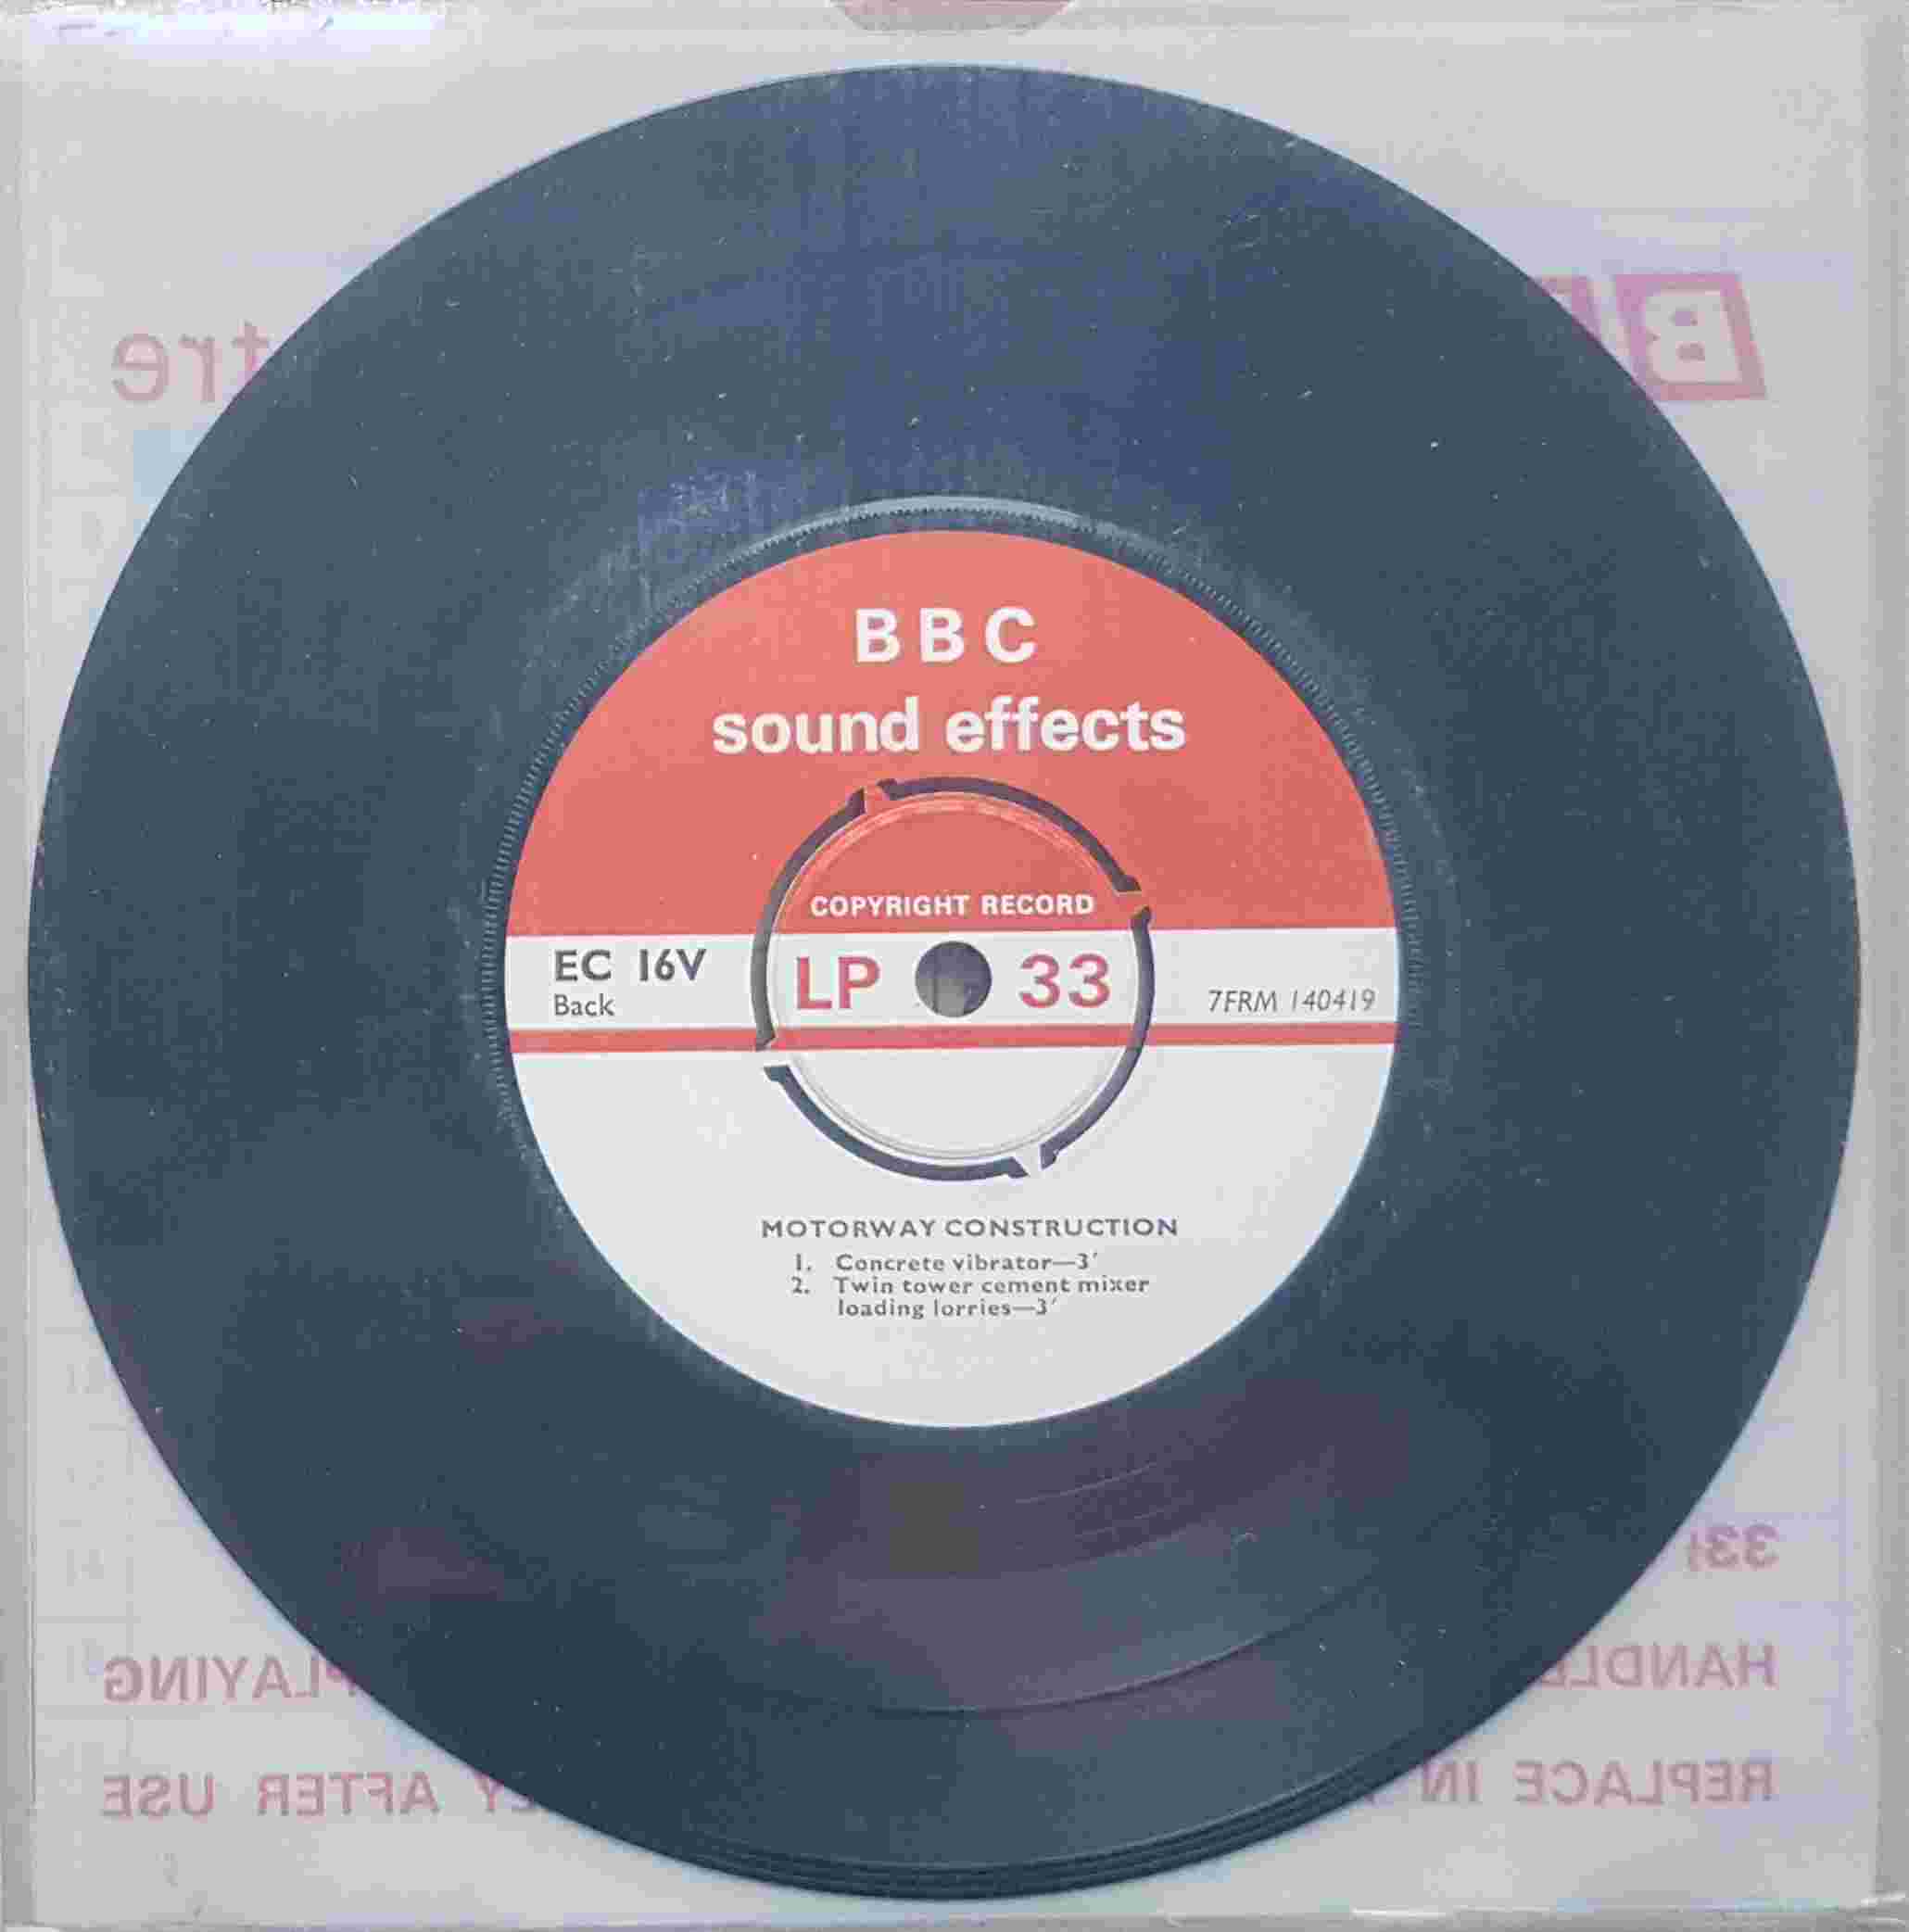 Picture of EC 16V Motorway construction by artist Not registered from the BBC records and Tapes library